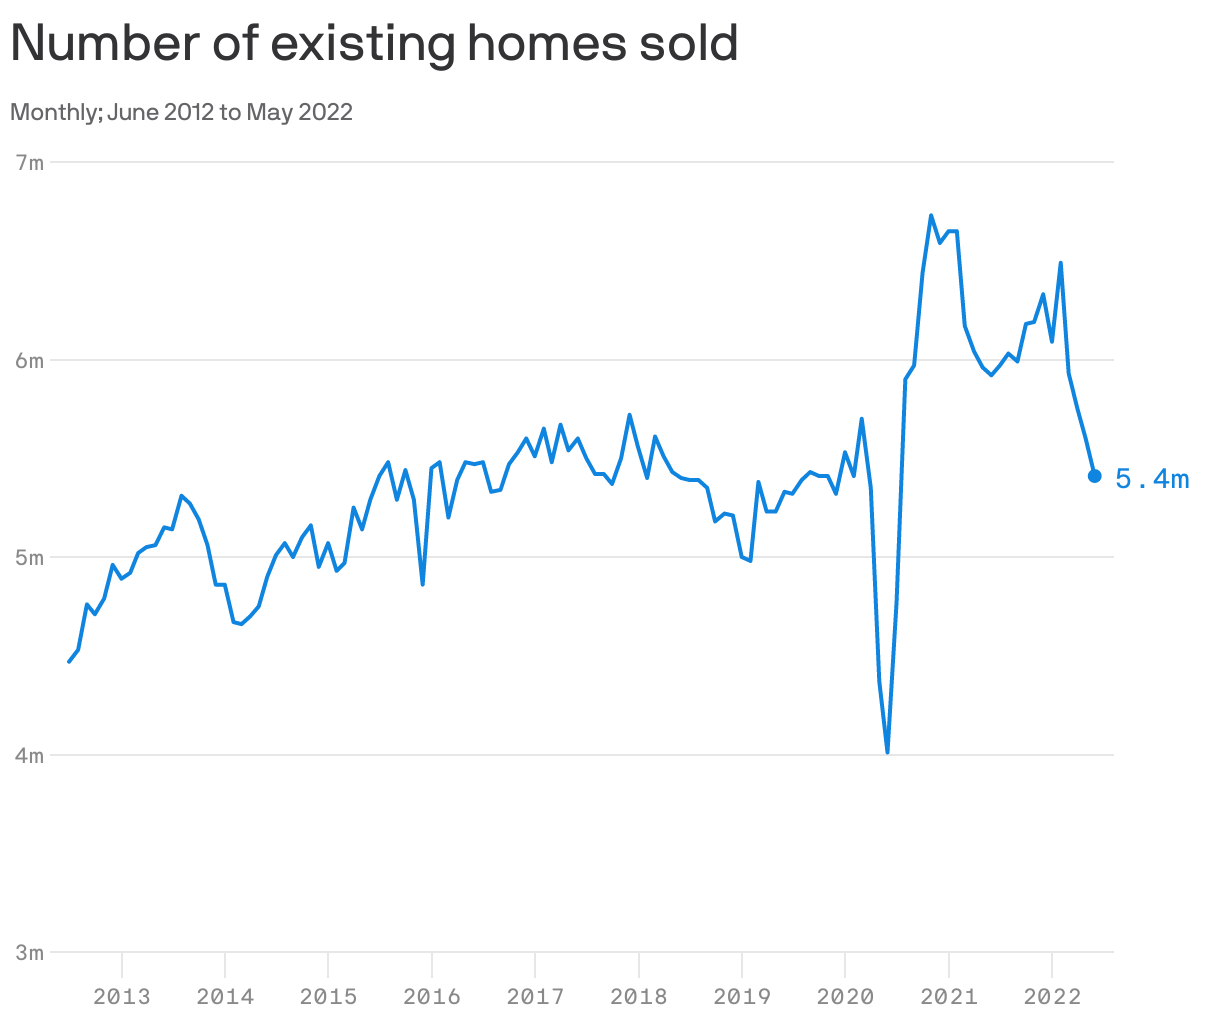 Number of existing homes sold